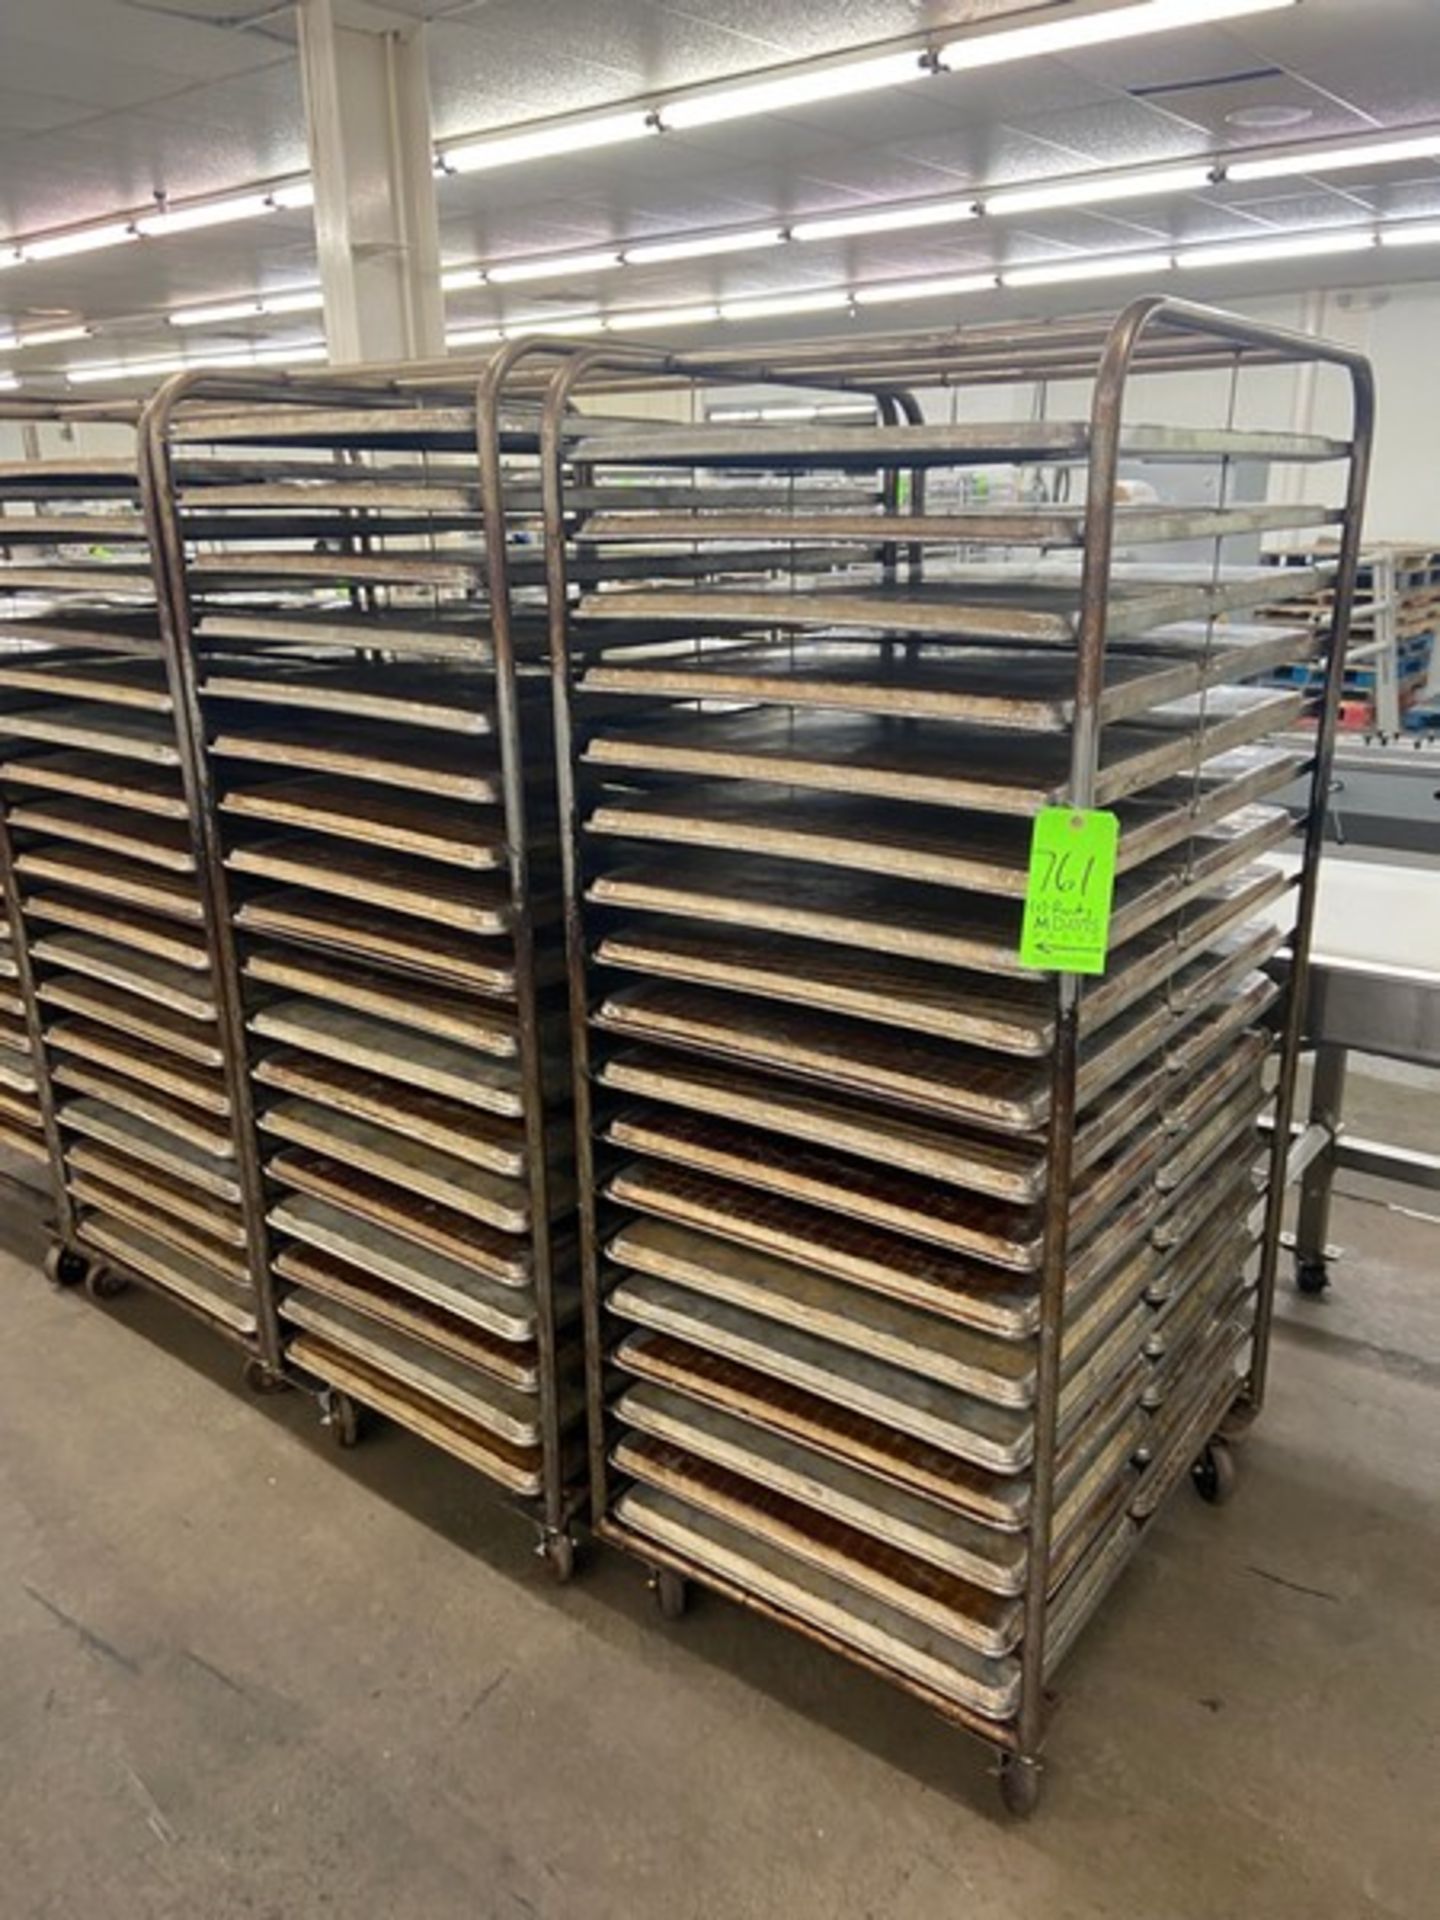 (4) PORTABLE DOUBLE SIDED BAKING PAN RACKS, MOUNTED ON CASTERS (LOCATED IN HERMITAGE, PA) - Image 2 of 2